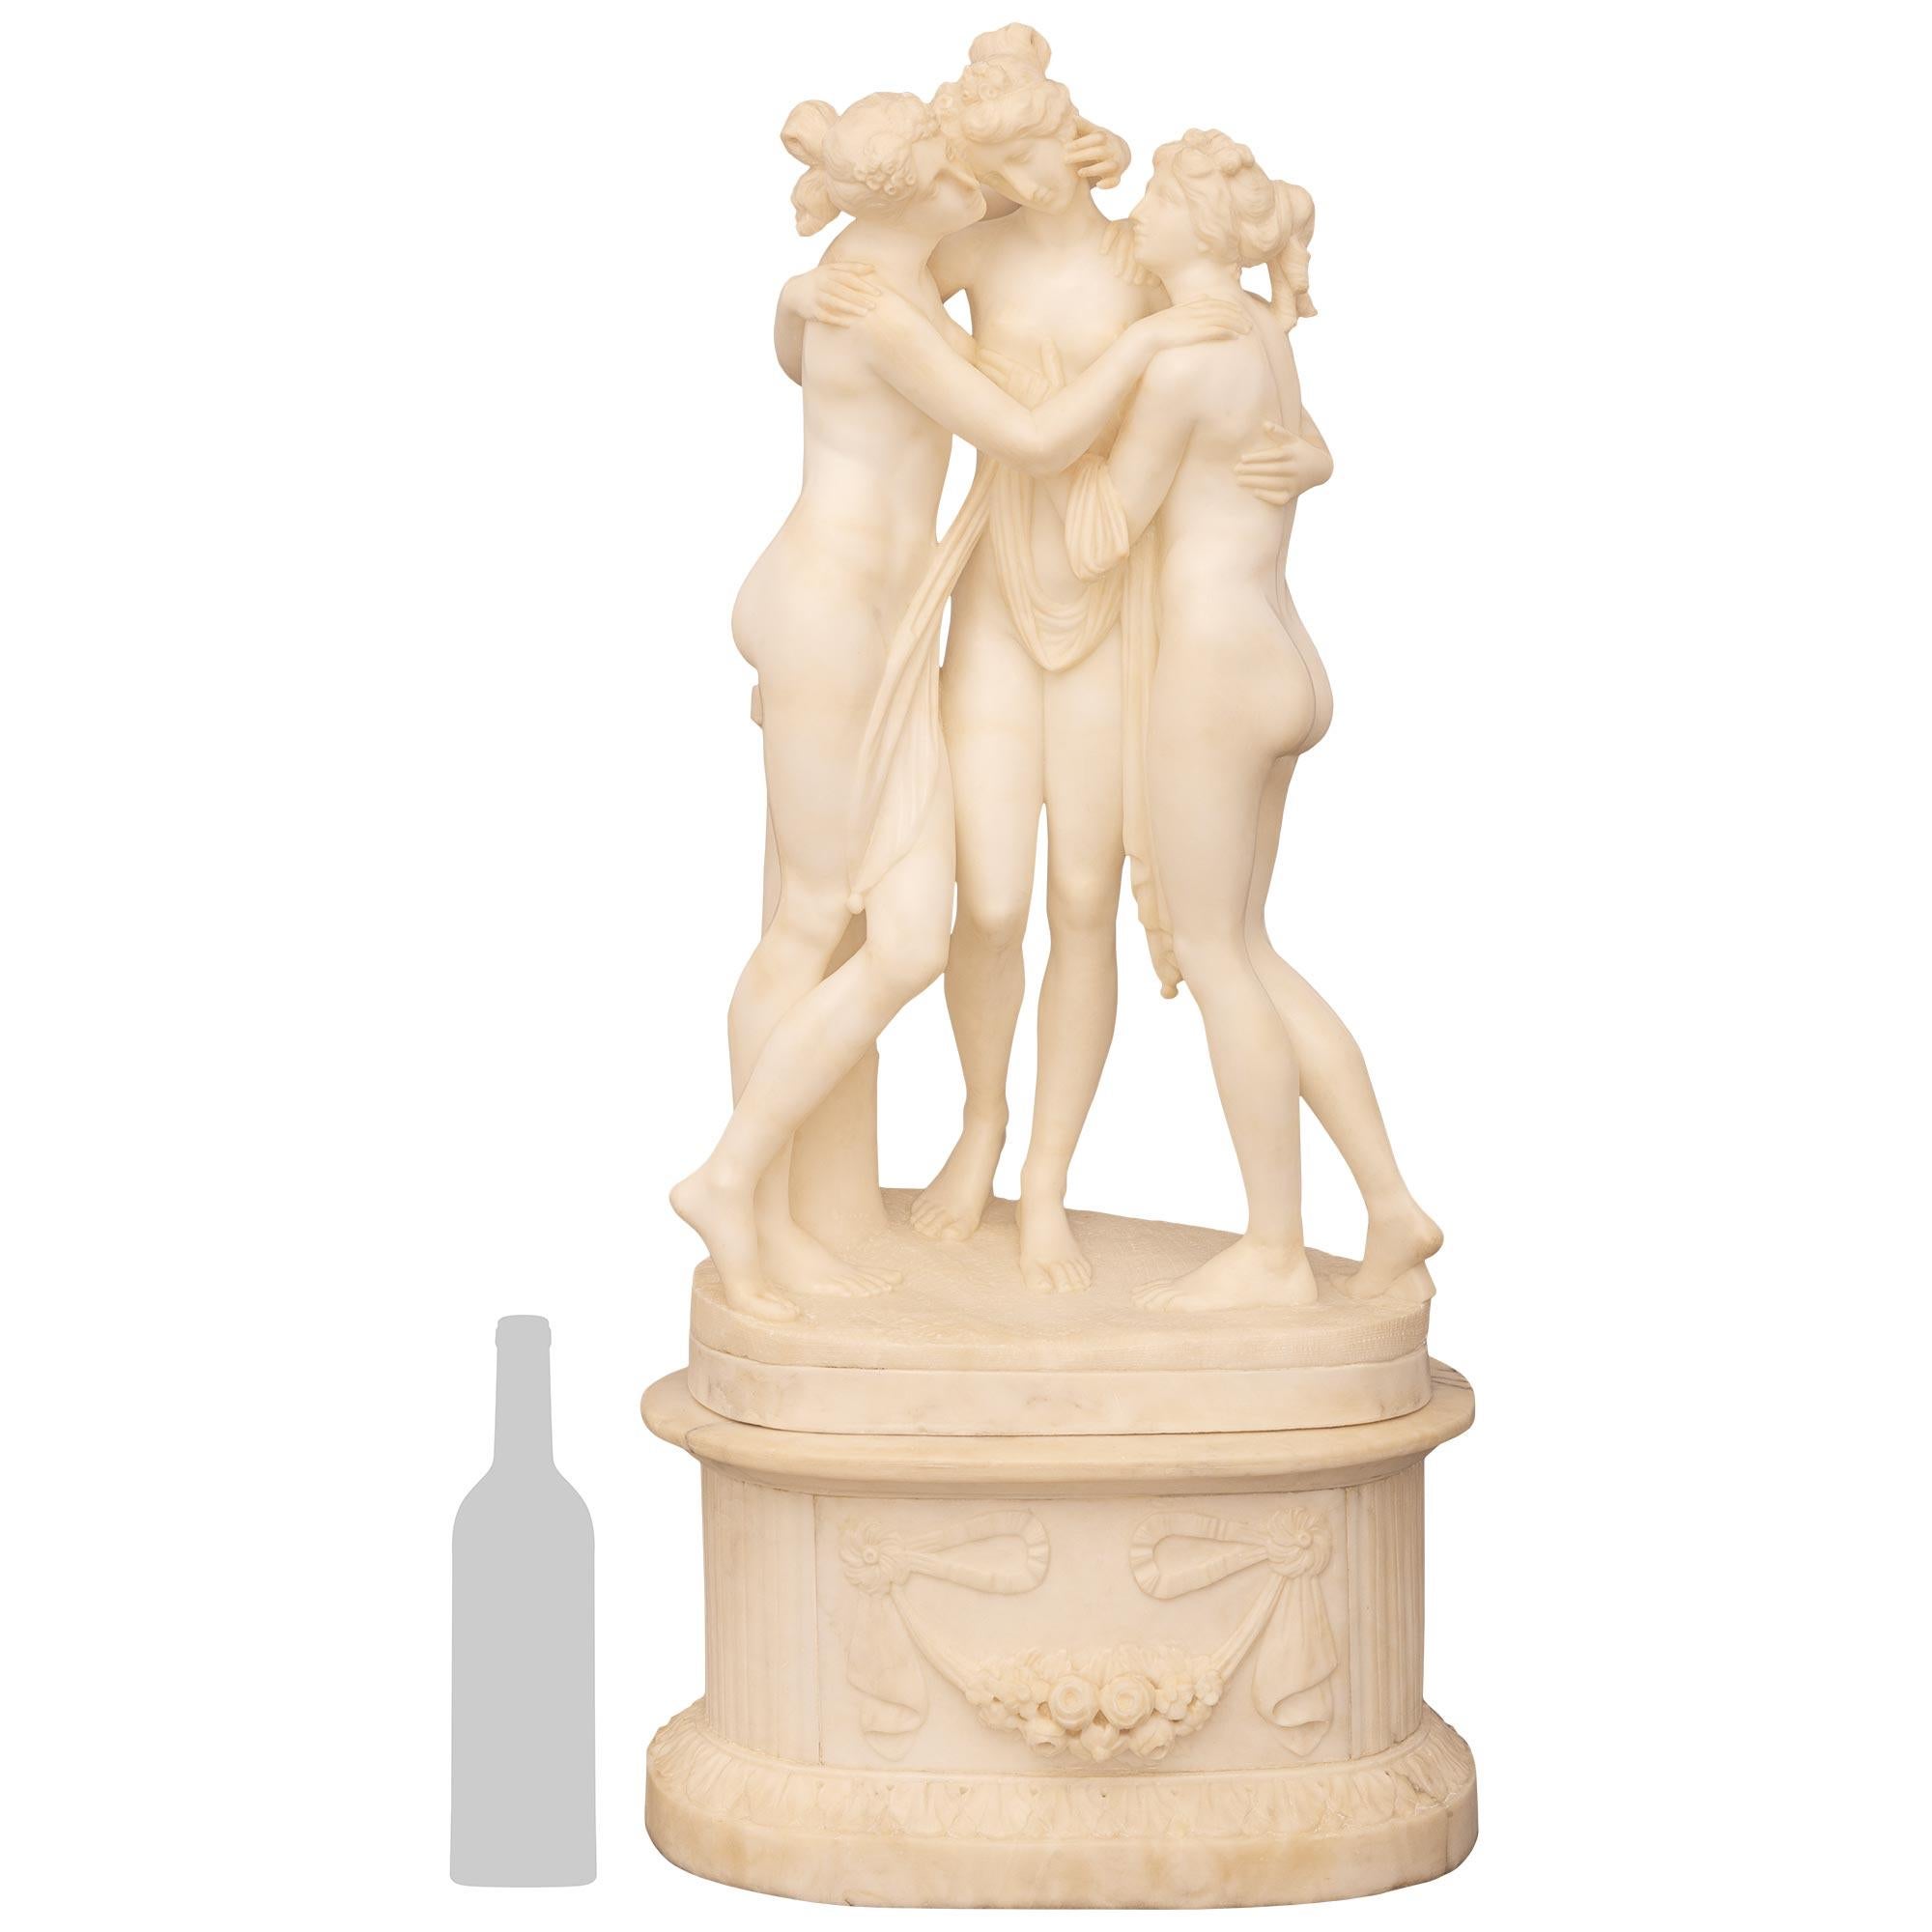 A beautiful Italian 19th century Neo-Classical st. Alabaster statue of The Three Graces. This wonderful Alabaster statue is raised by its original oval base with mottled edges and decorated with swaging floral garlands held by flowing fabrics. The